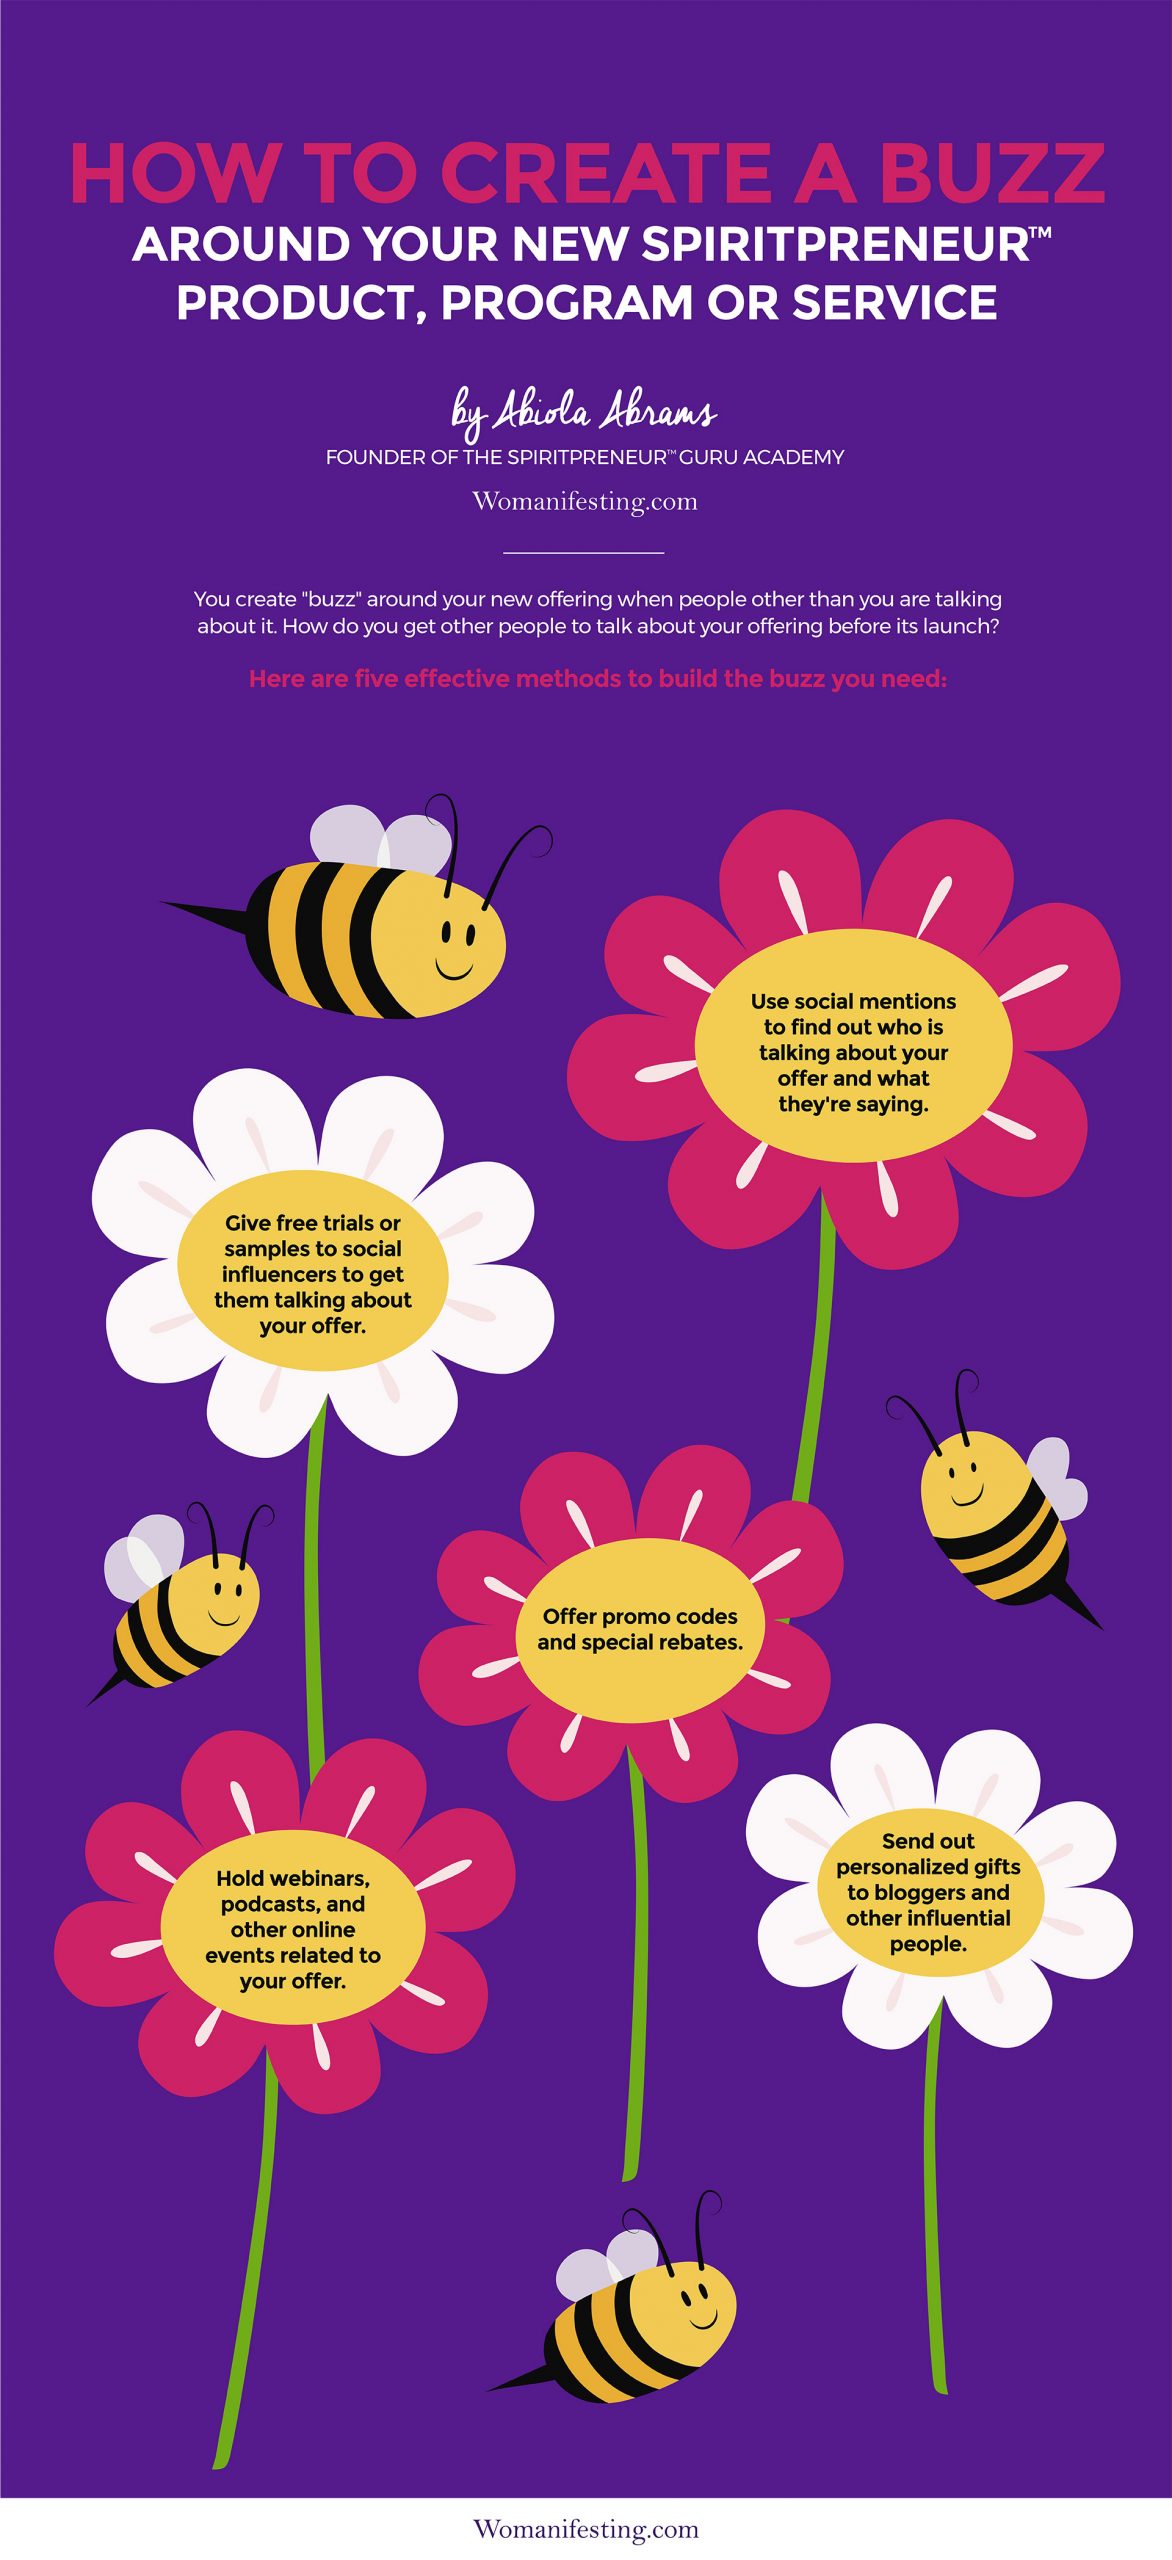 5-Ways-to-Create-the-Buzz-Around-Your-New-Product_Infographic